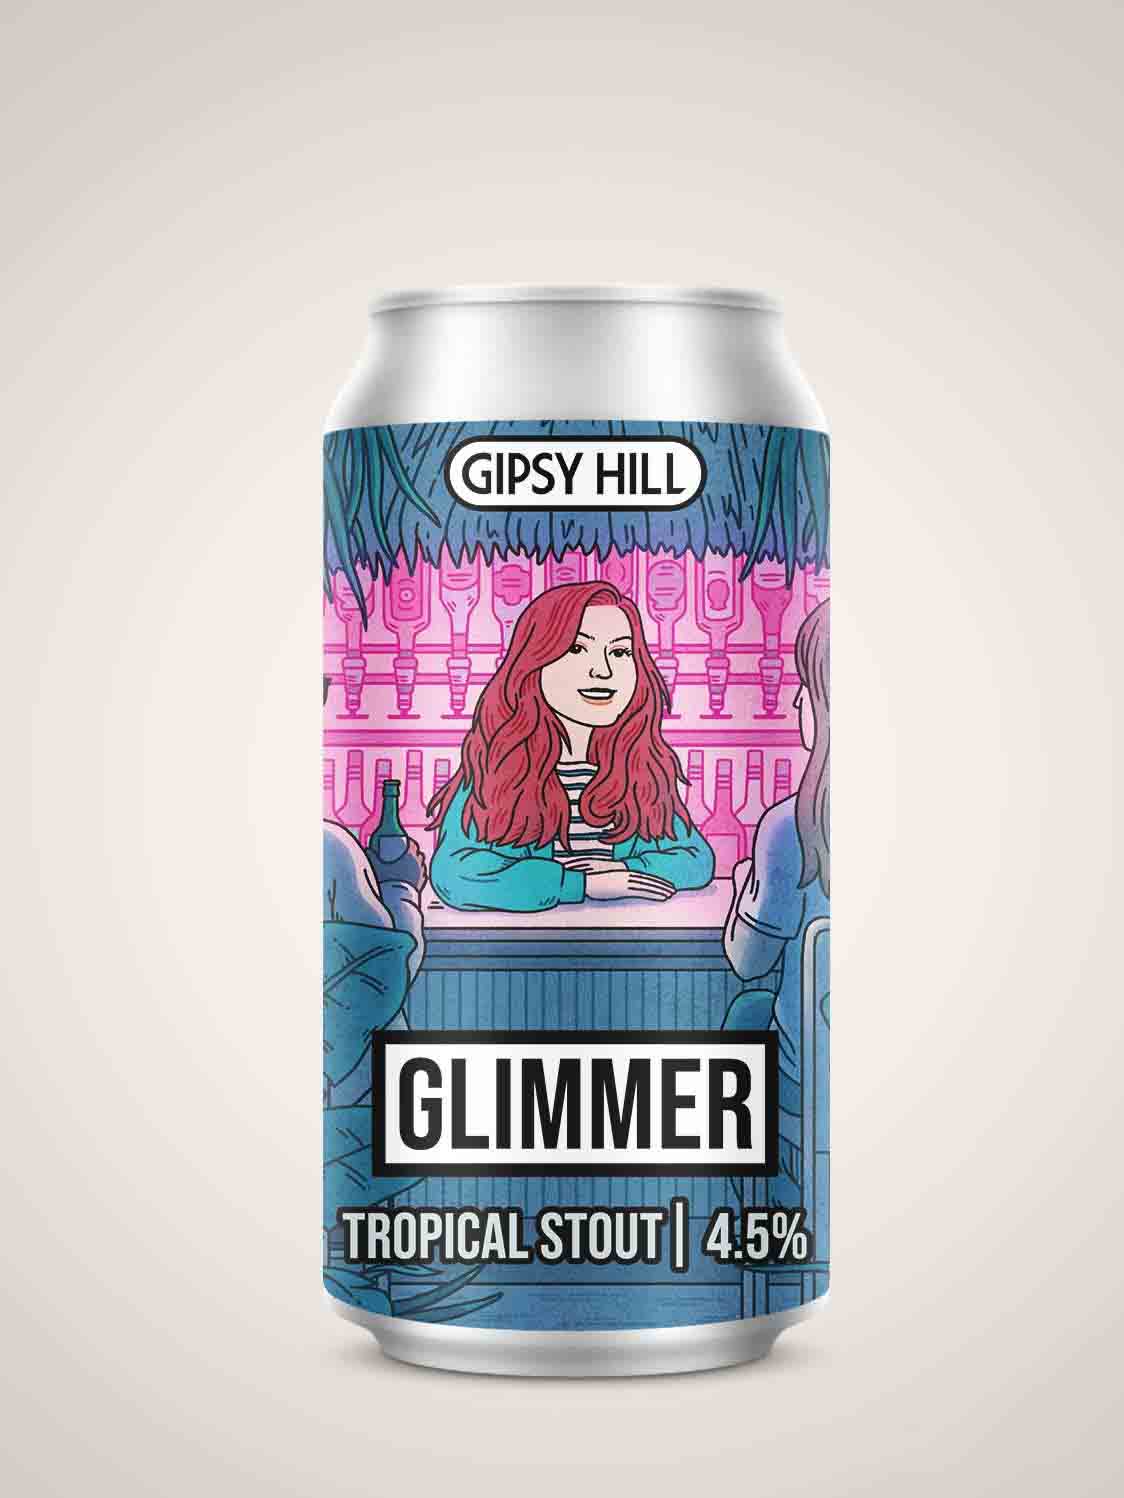 Gipsy Hill - Glimmer Tropical Stout 4.5%